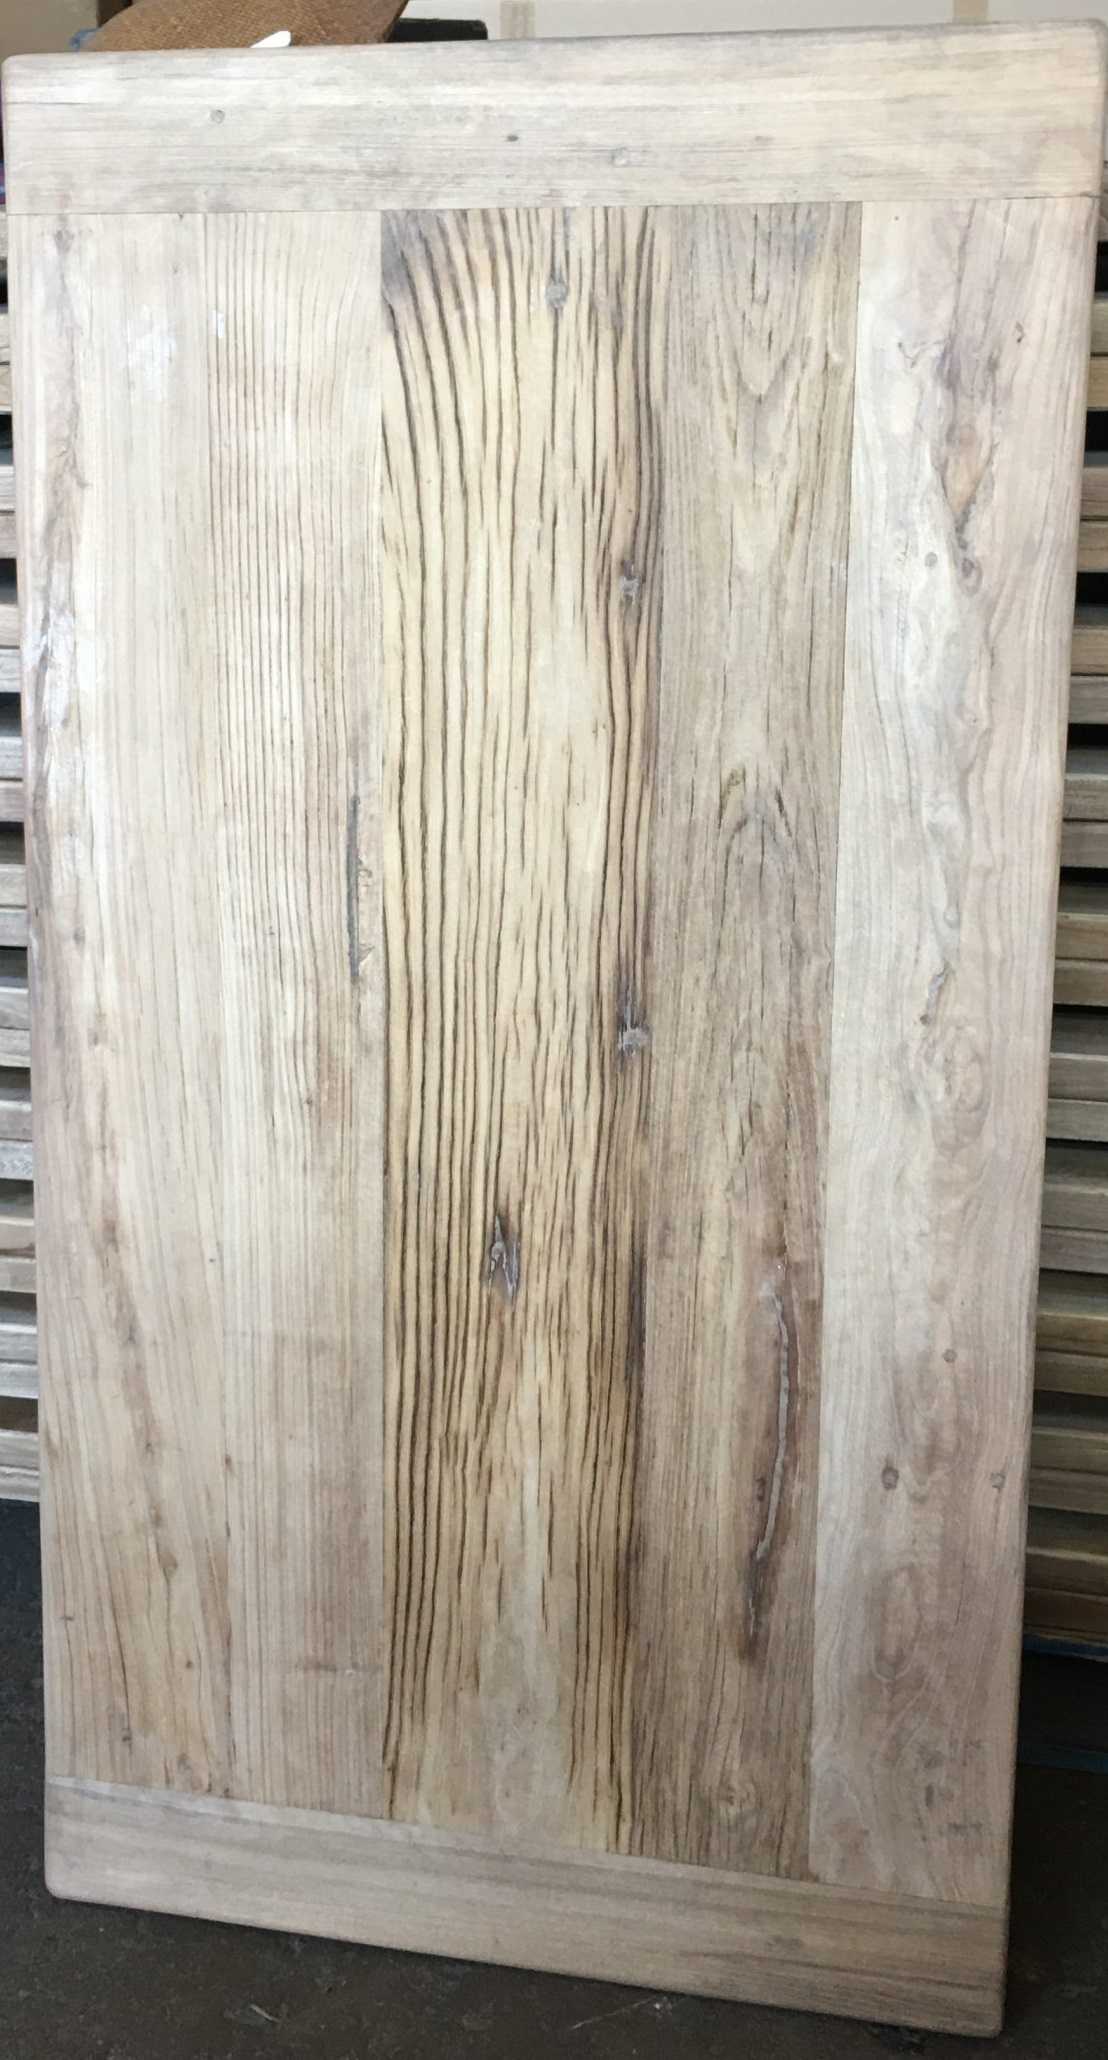 MF Recycled Elm Timber Dining Table